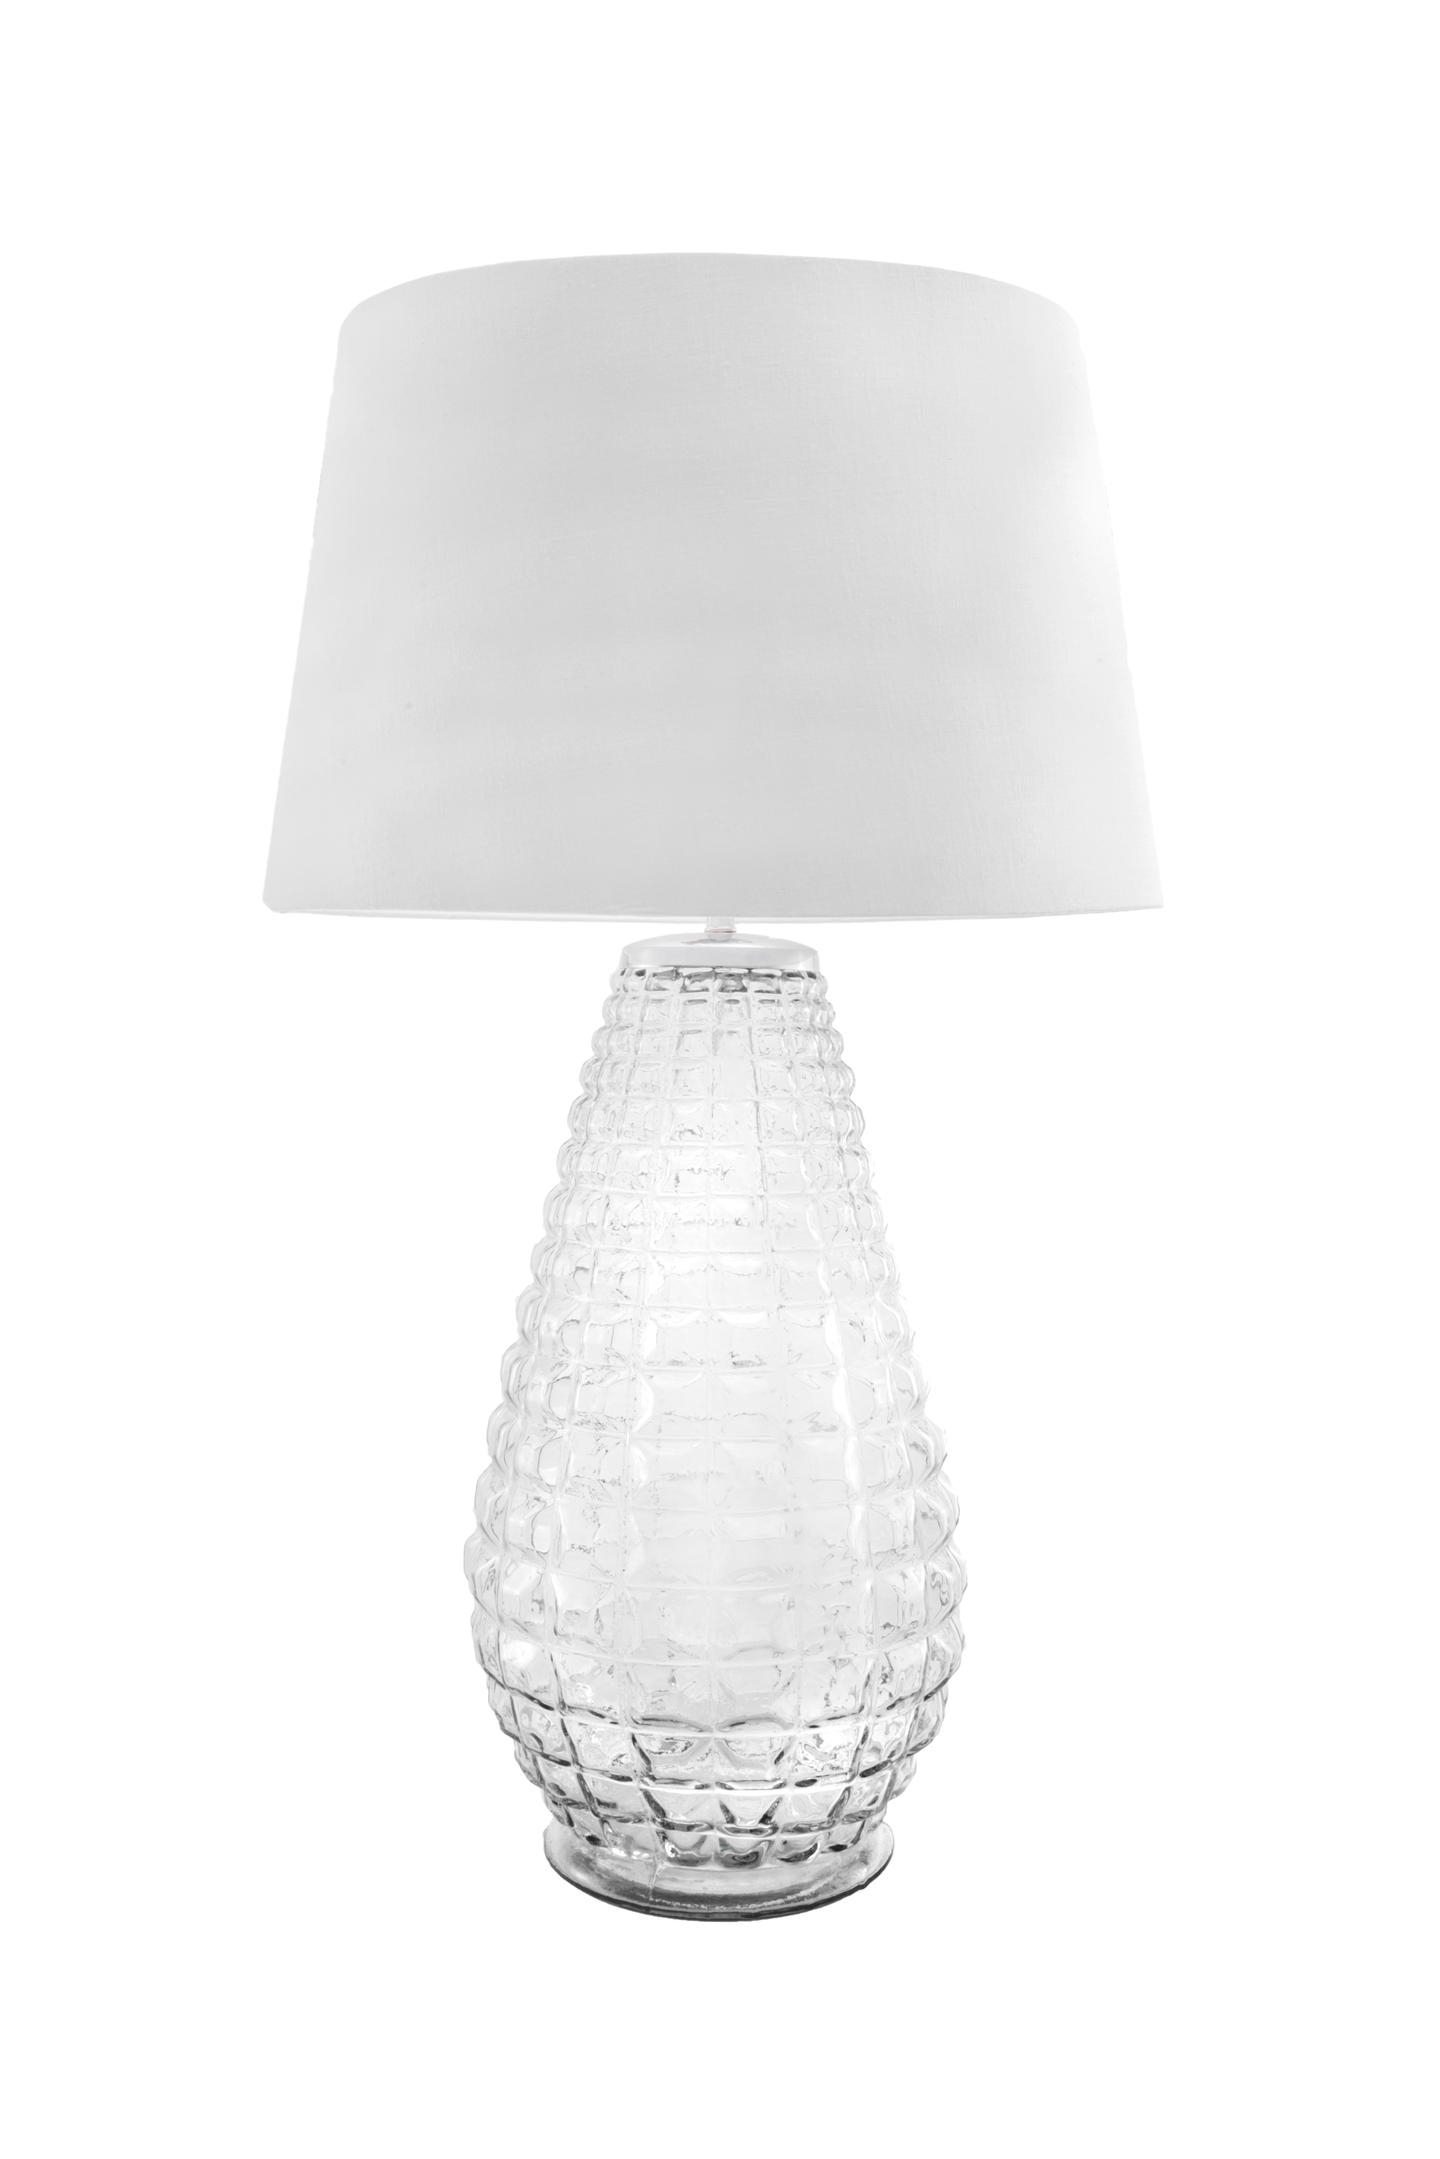 Elyria 28" Glass Table Lamp - Image 1